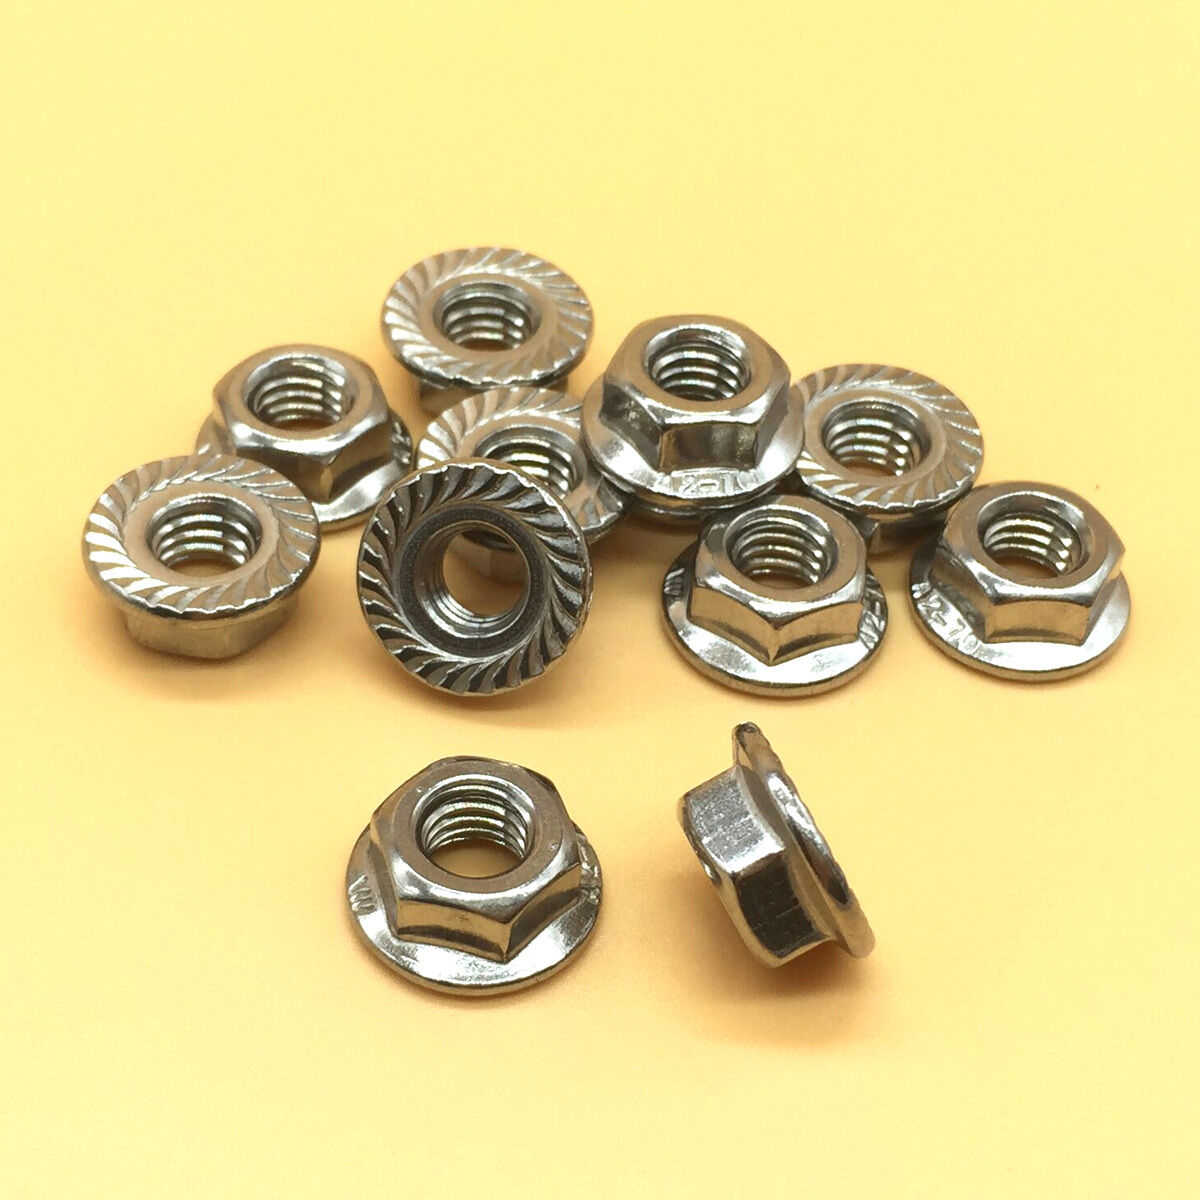 12 Pcs M12 x 1.75 Stainless Steel Flange Hex Nut Right Hand Thread [M1]